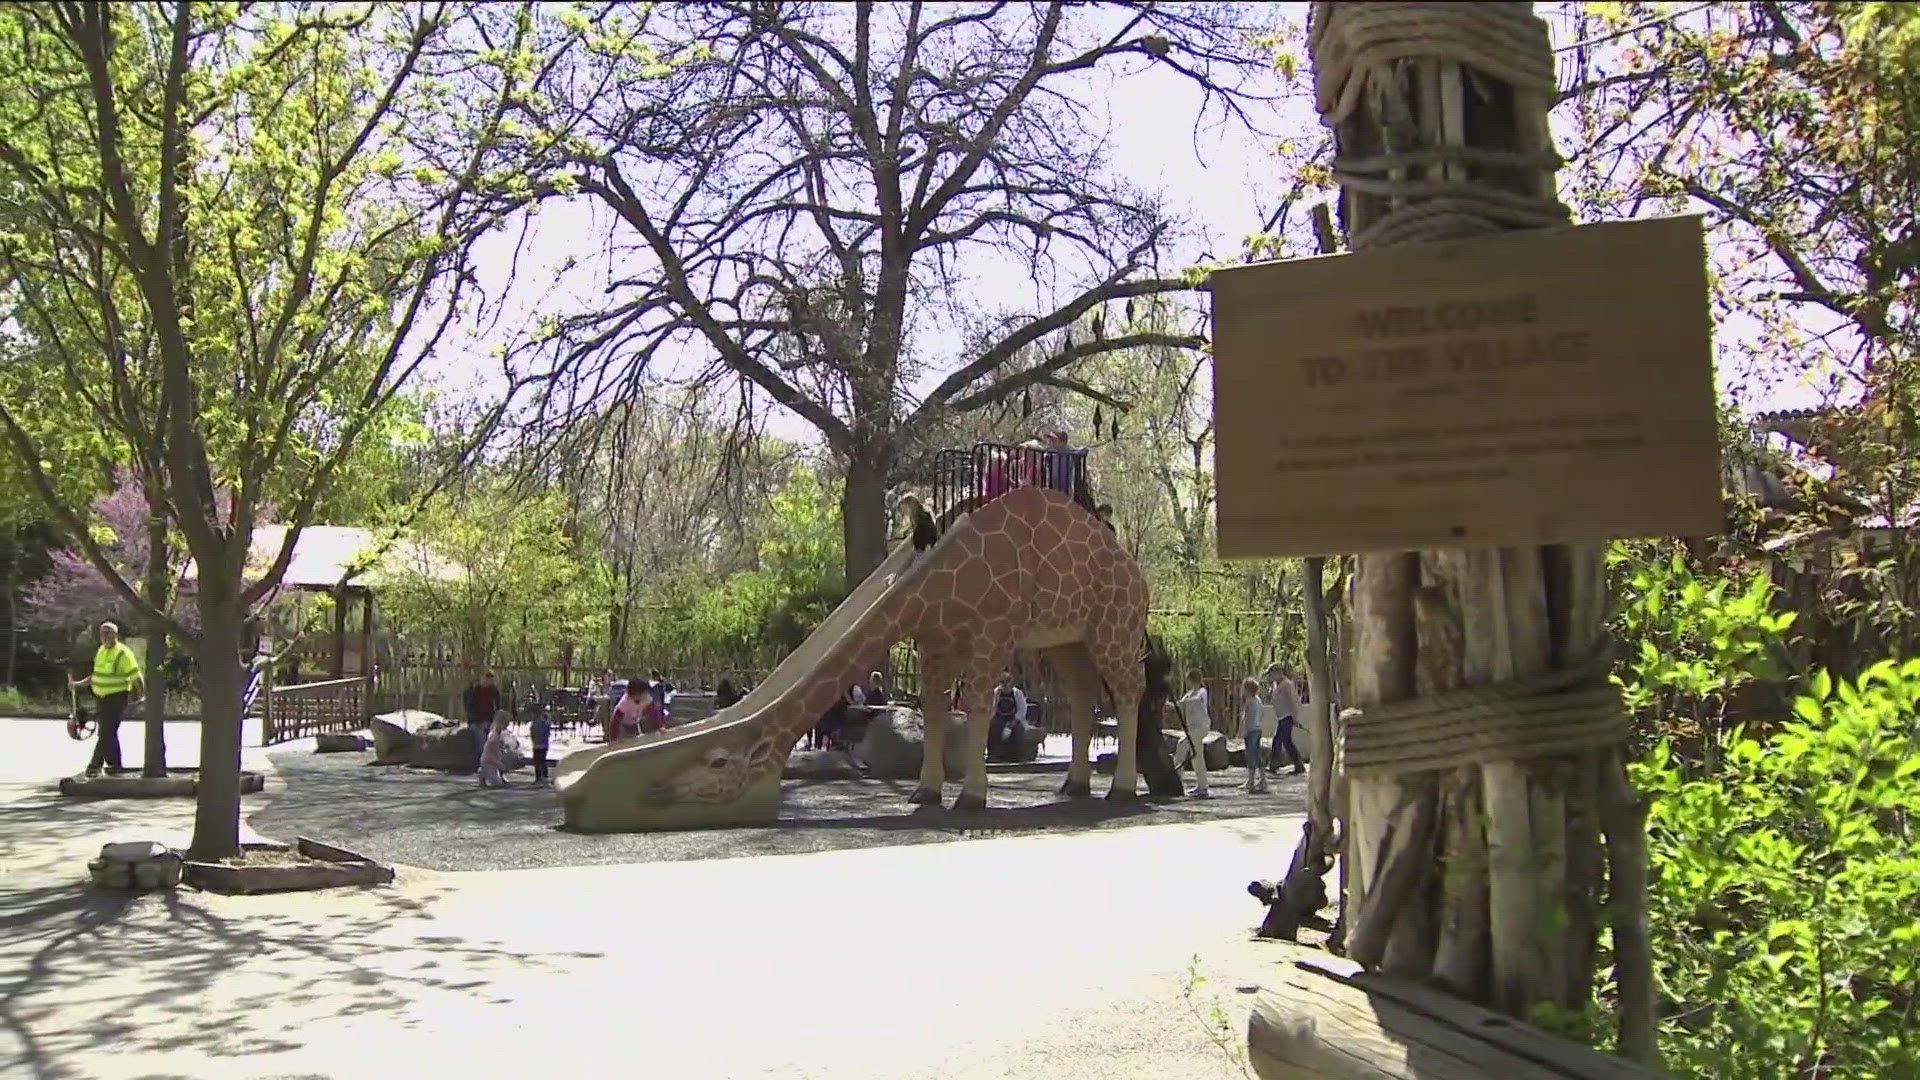 The giraffe slide at Zoo Boise was recently moved closer to the real giraffe exhibit, which is fitting because a group of giraffes can be called a tower.